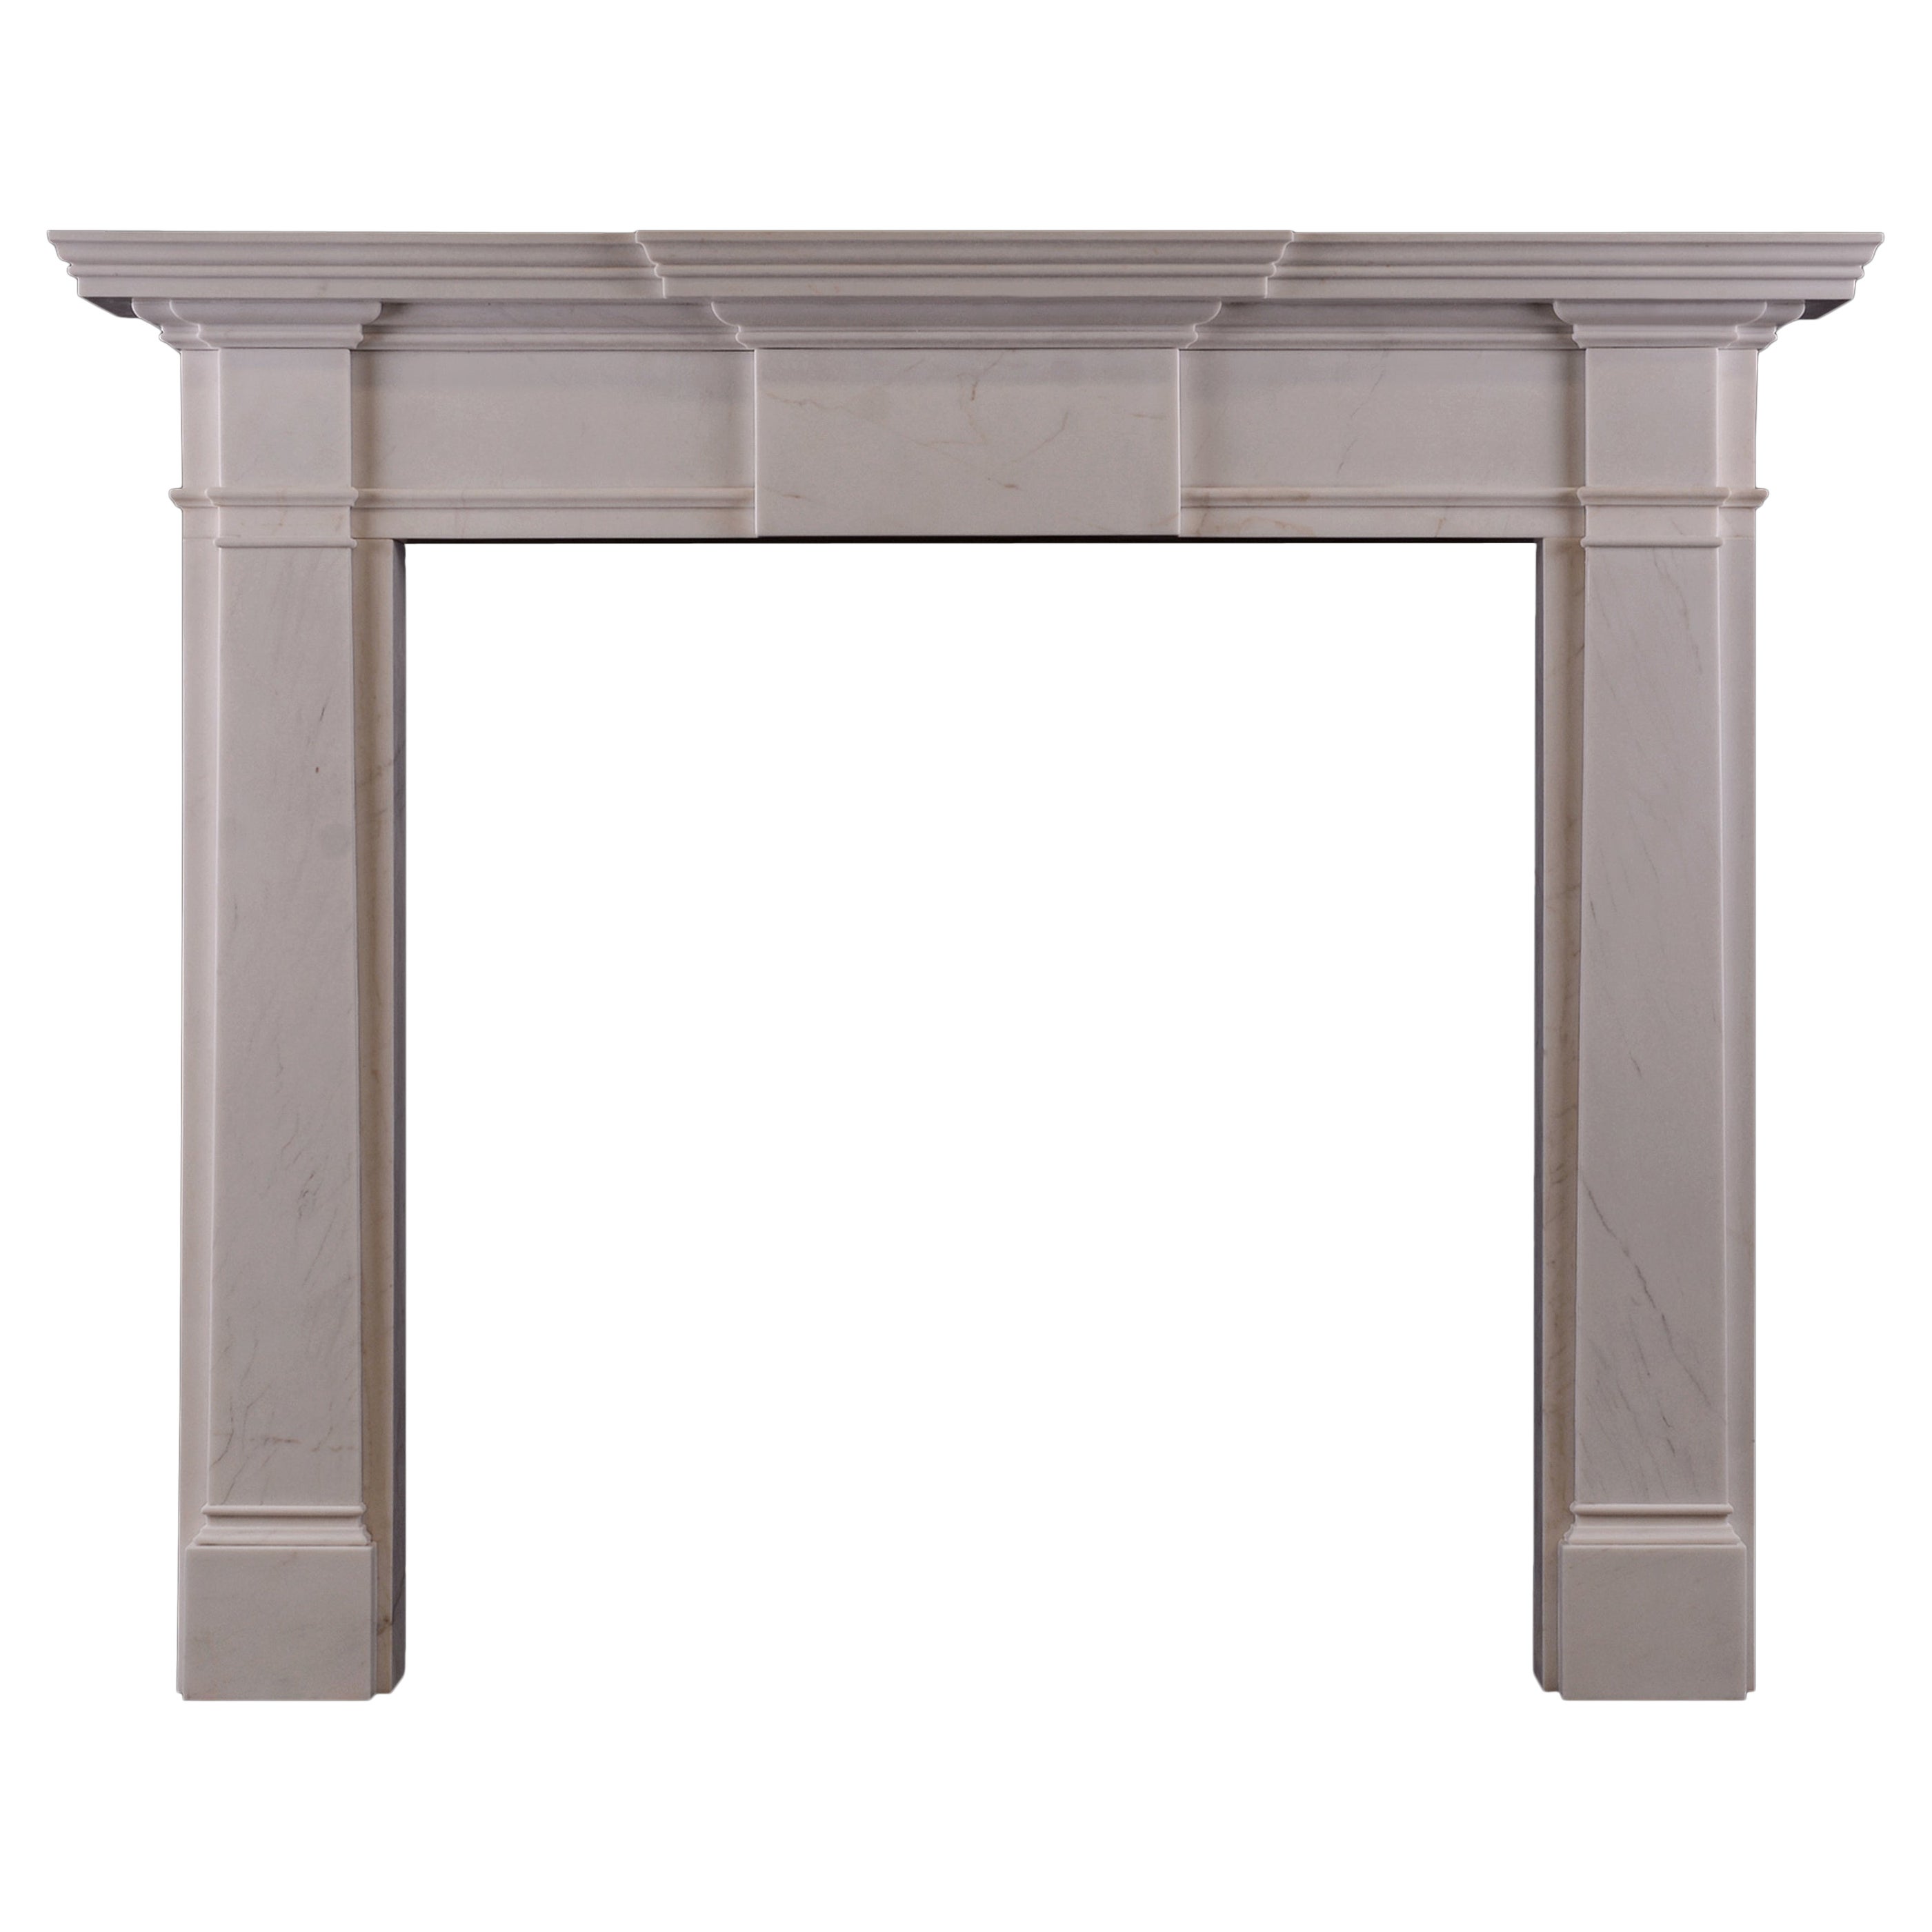 Mid-Sized English Georgian Style Fireplace For Sale